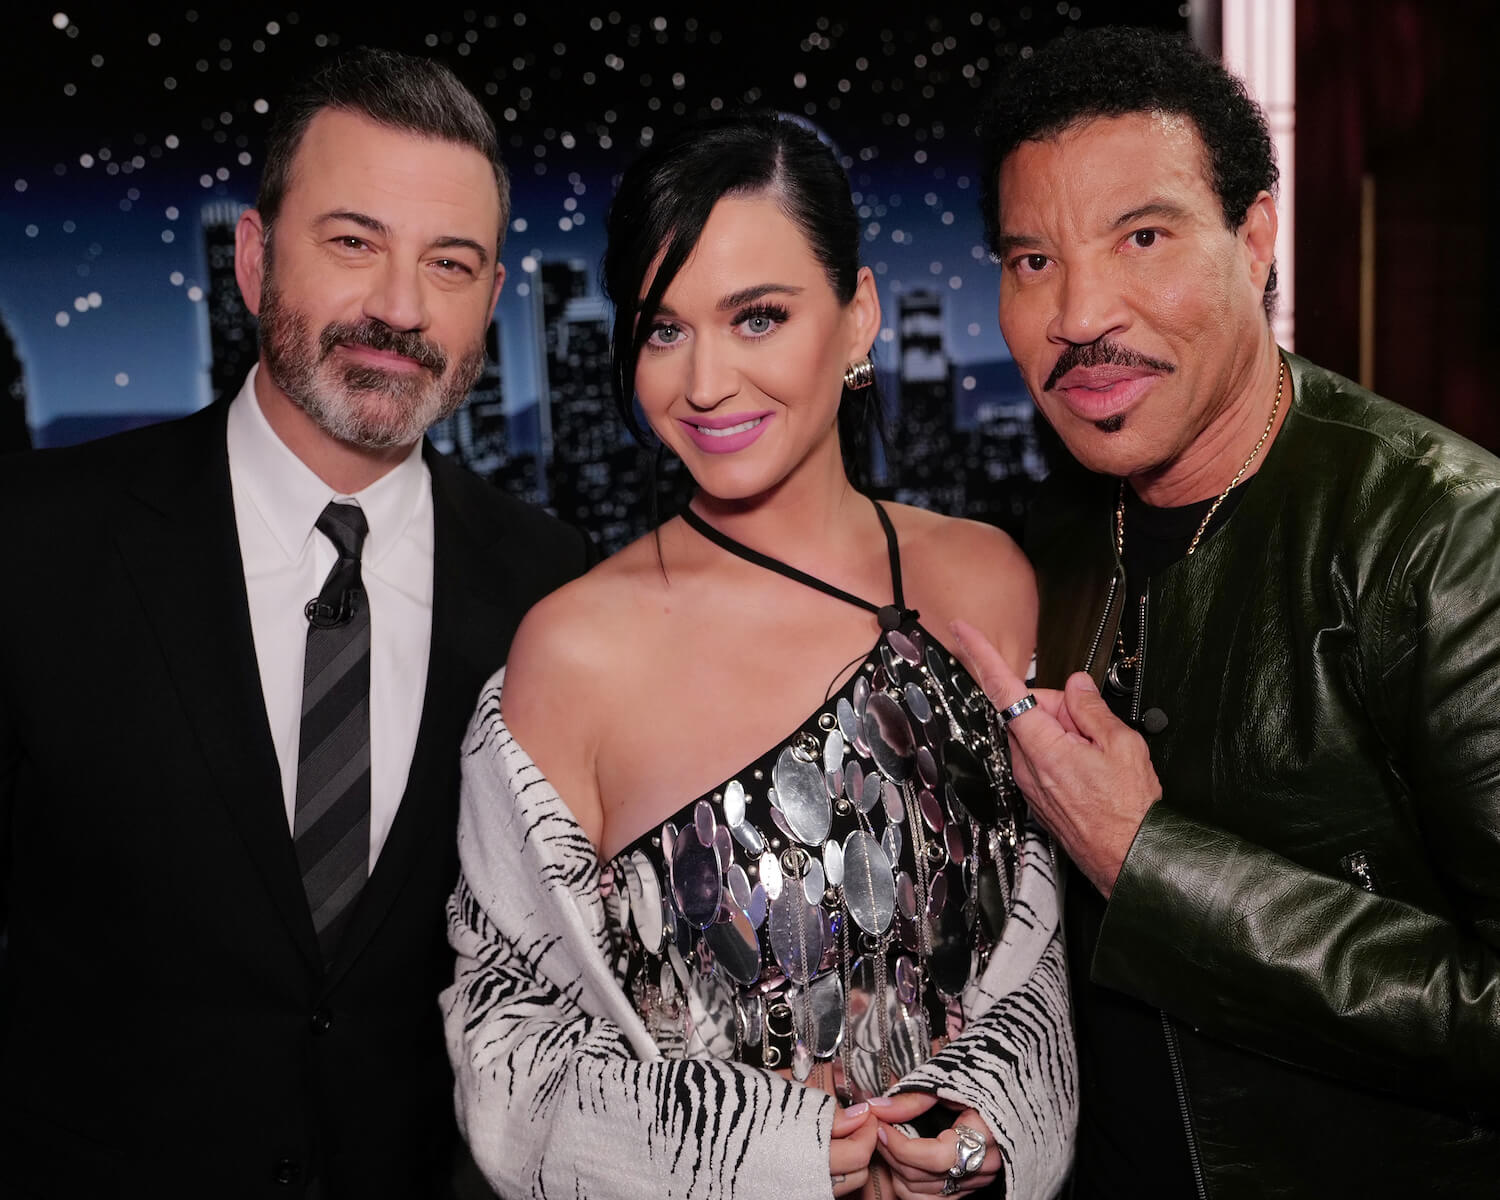 Jimmy Kimmel, Katy Perry, and Lionel Richie posing together